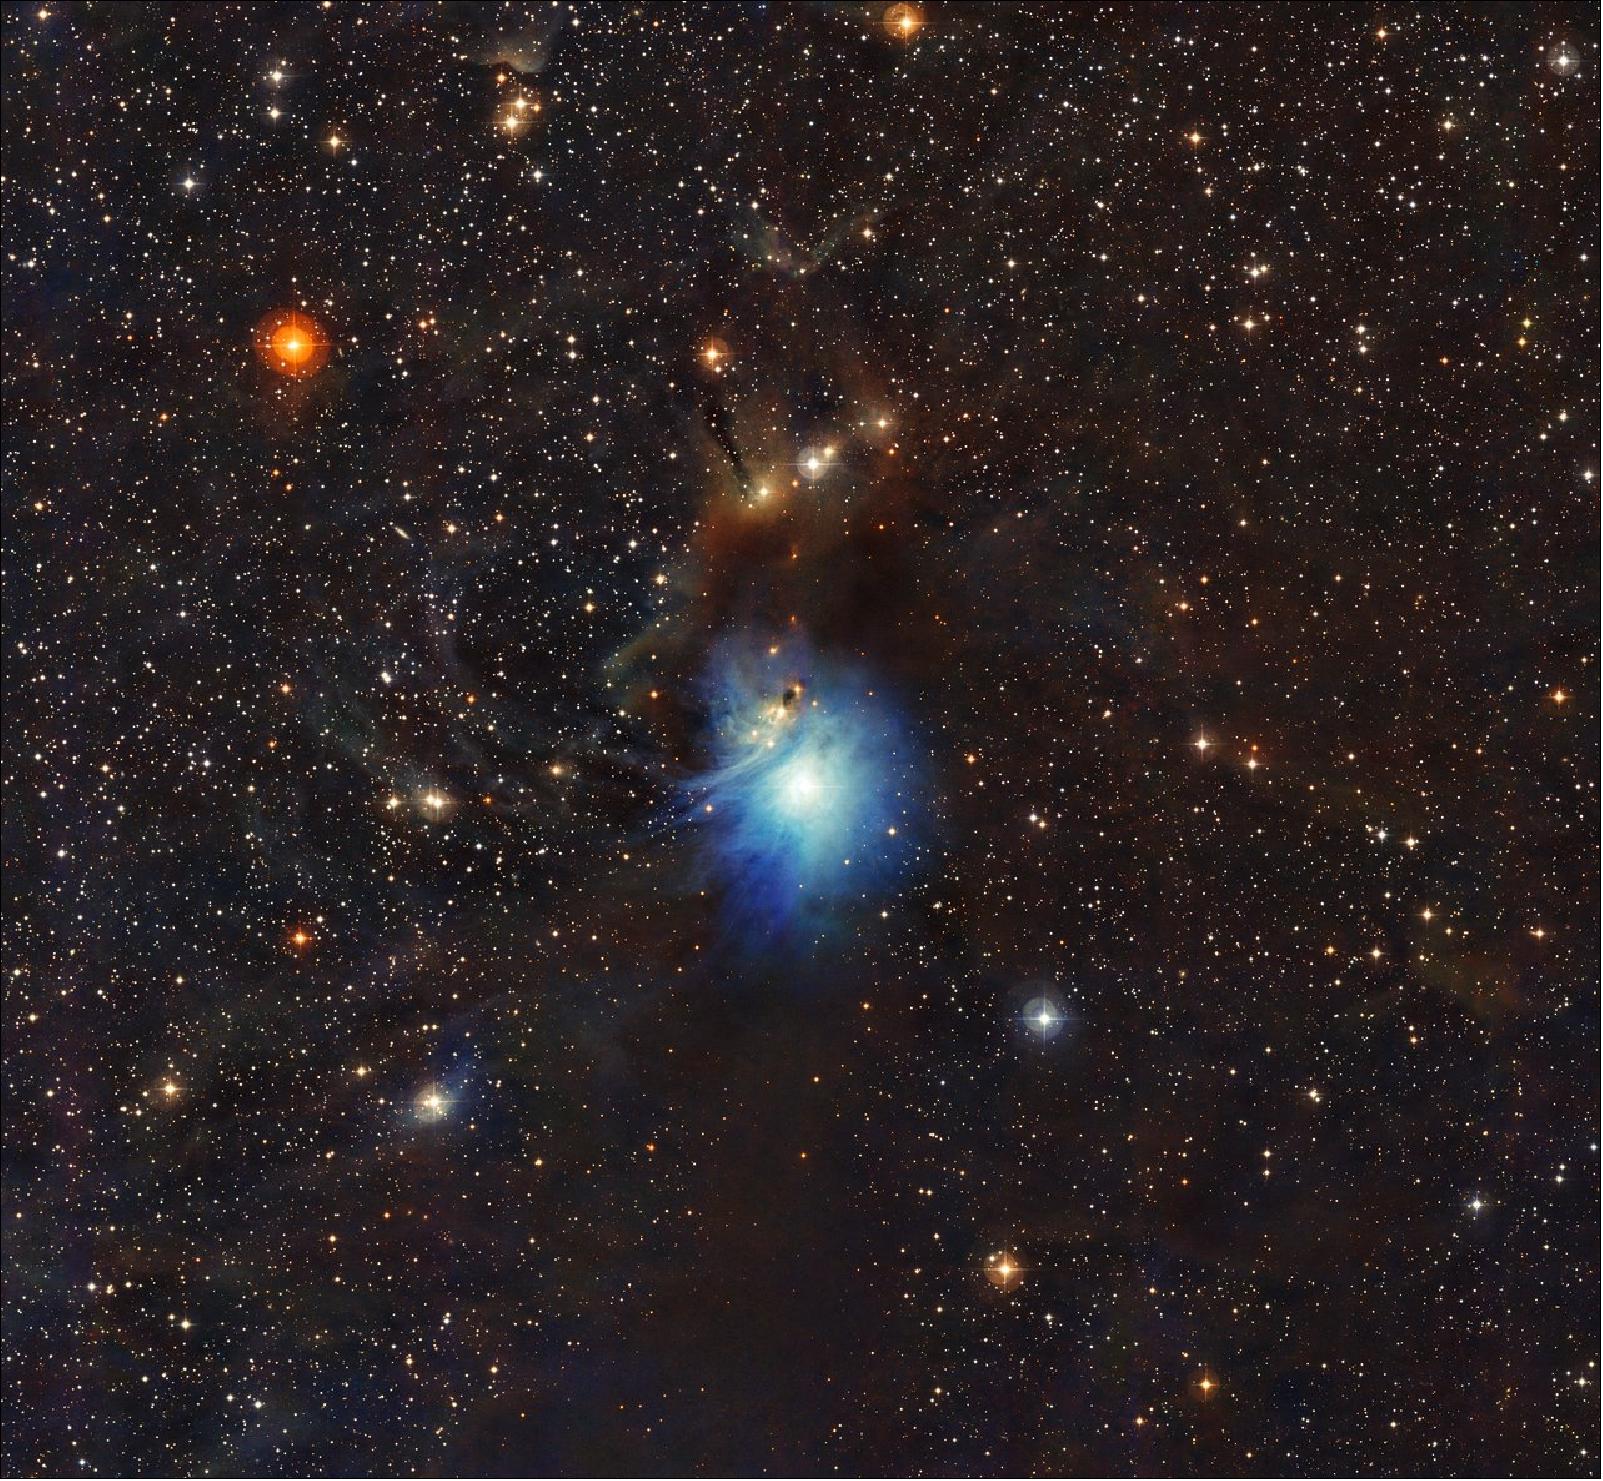 Figure 16: A newly formed star lights up the surrounding cosmic clouds in this image from ESO’s La Silla Observatory in Chile. Dust particles in the vast clouds that surround the star HD 97300 diffuse its light, like a car headlight in enveloping fog, and create the reflection nebula IC 2631. Although HD 97300 is in the spotlight for now, the very dust that makes it so hard to miss heralds the birth of additional, potentially scene-stealing, future stars (image credit: ESO)